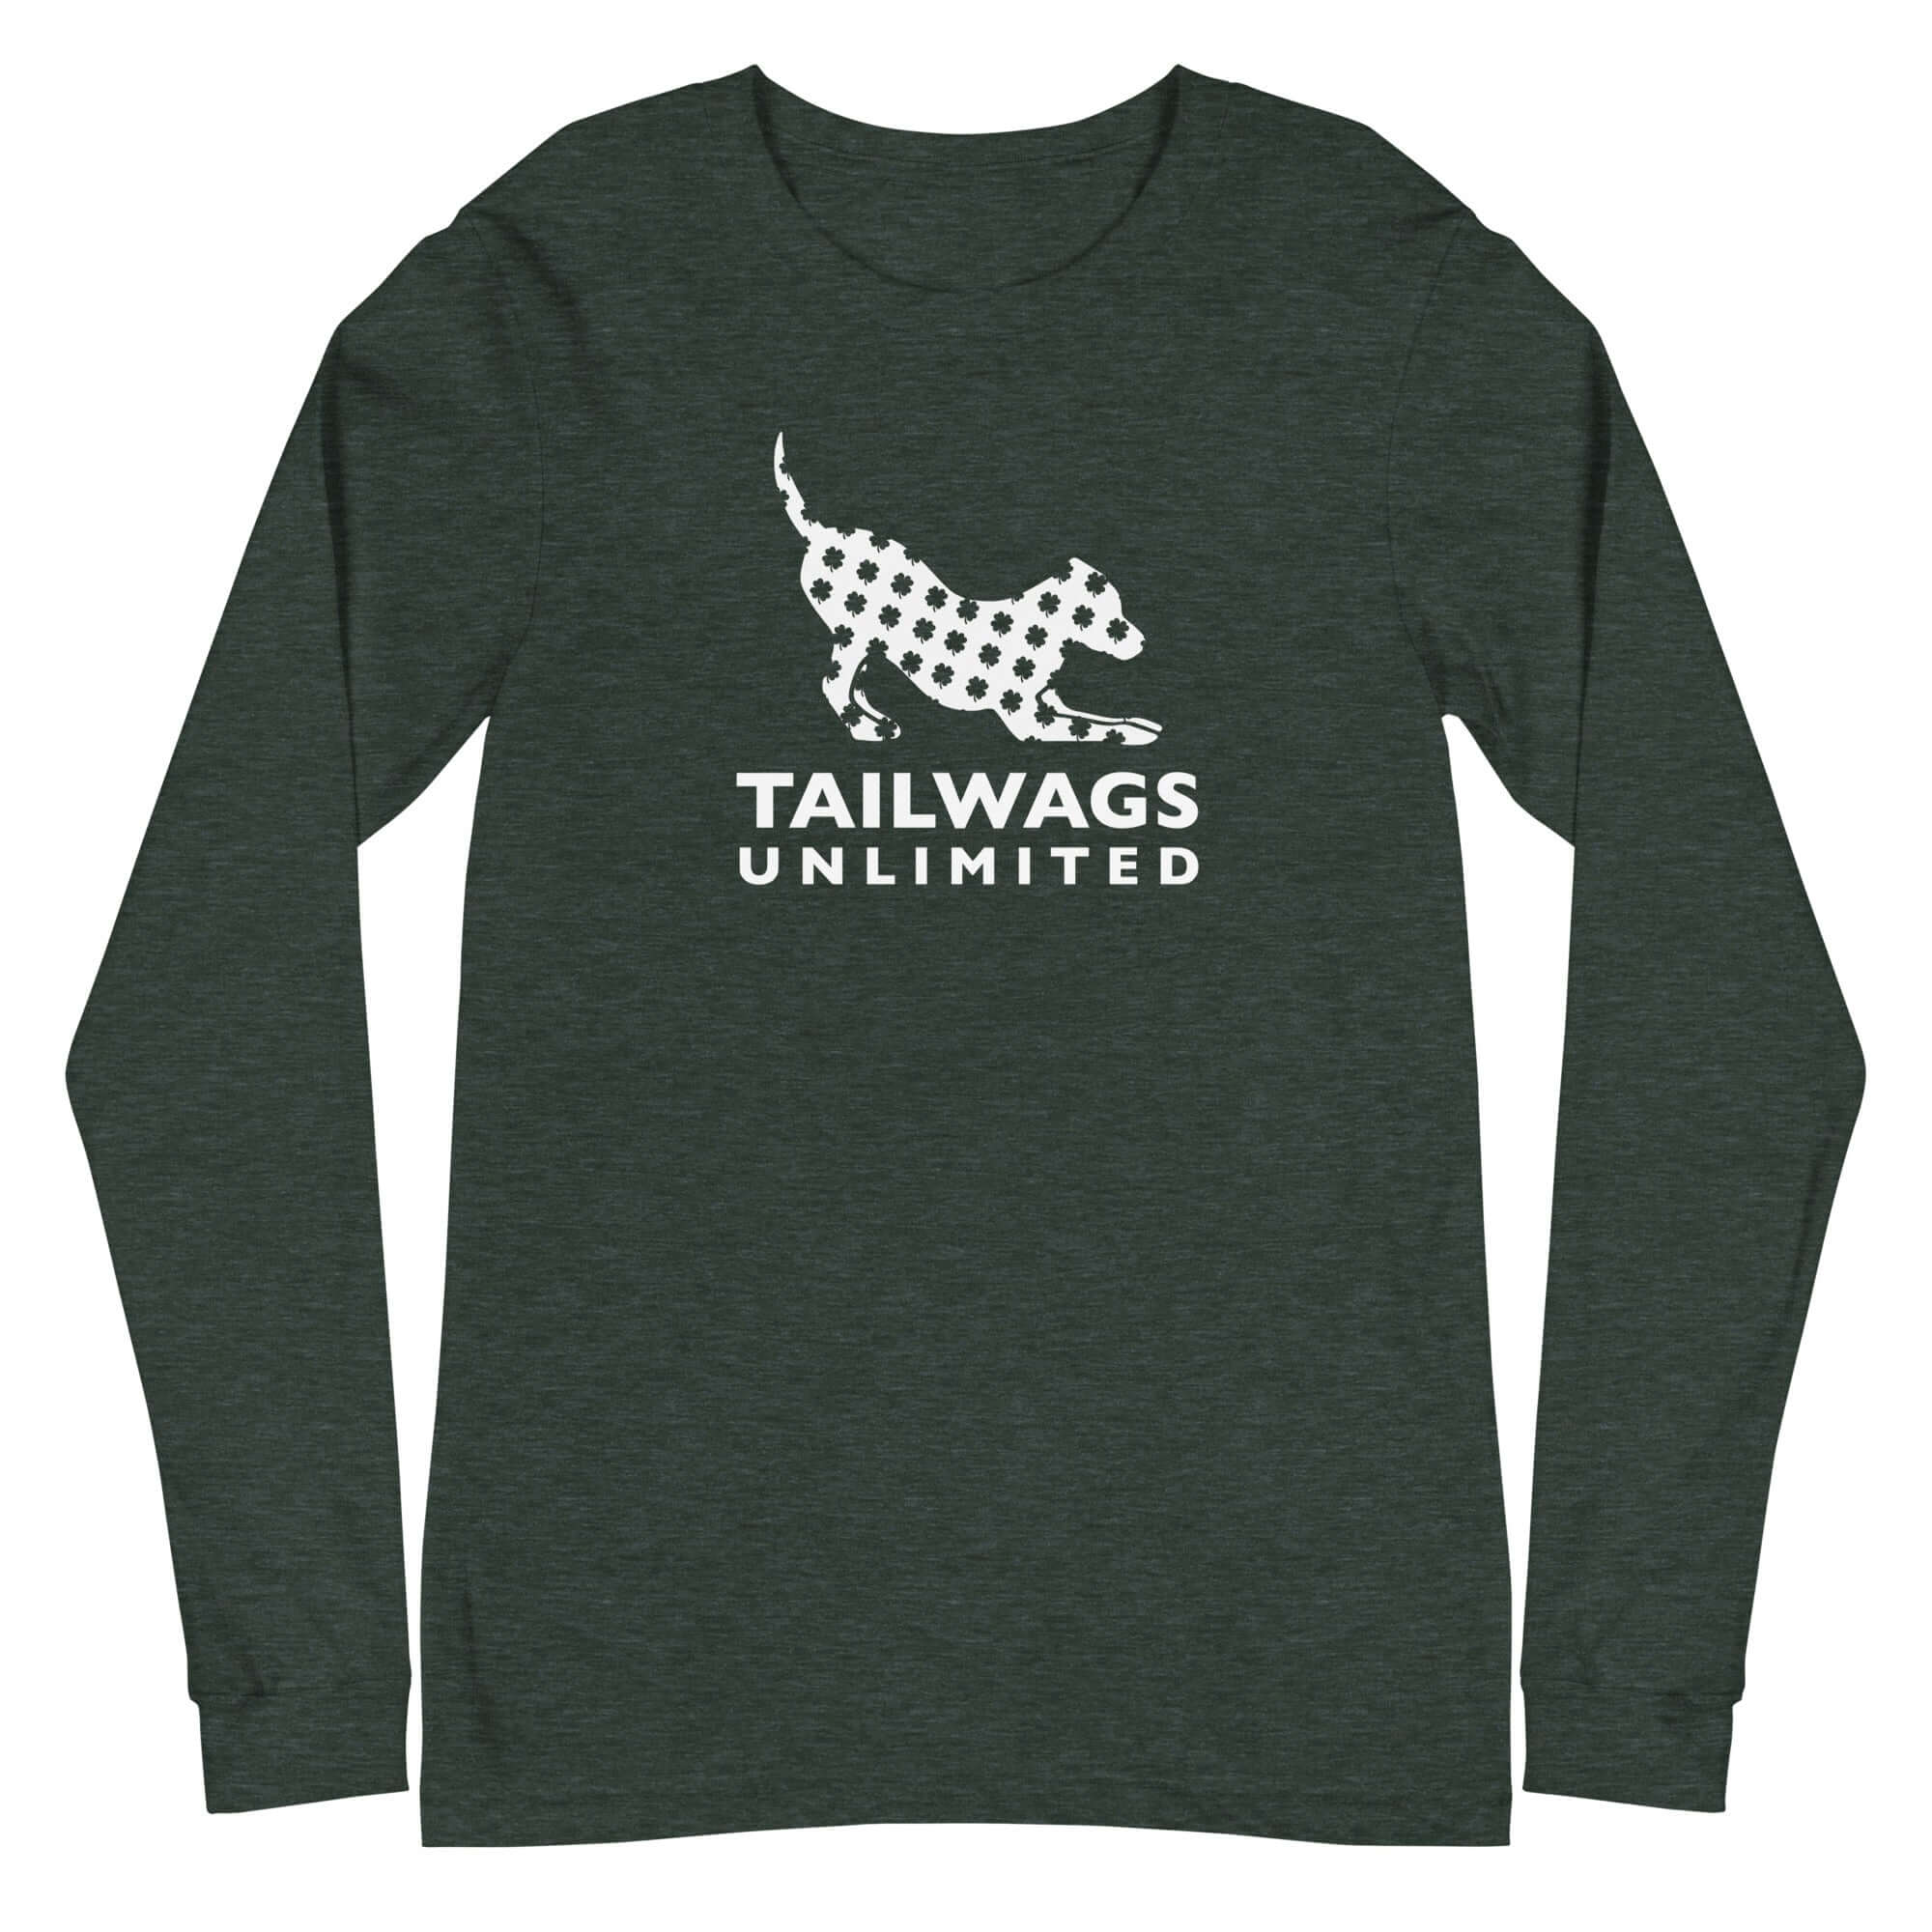 Clover Patterned White Logo Long Sleeve Tee - TAILWAGS UNLIMITED